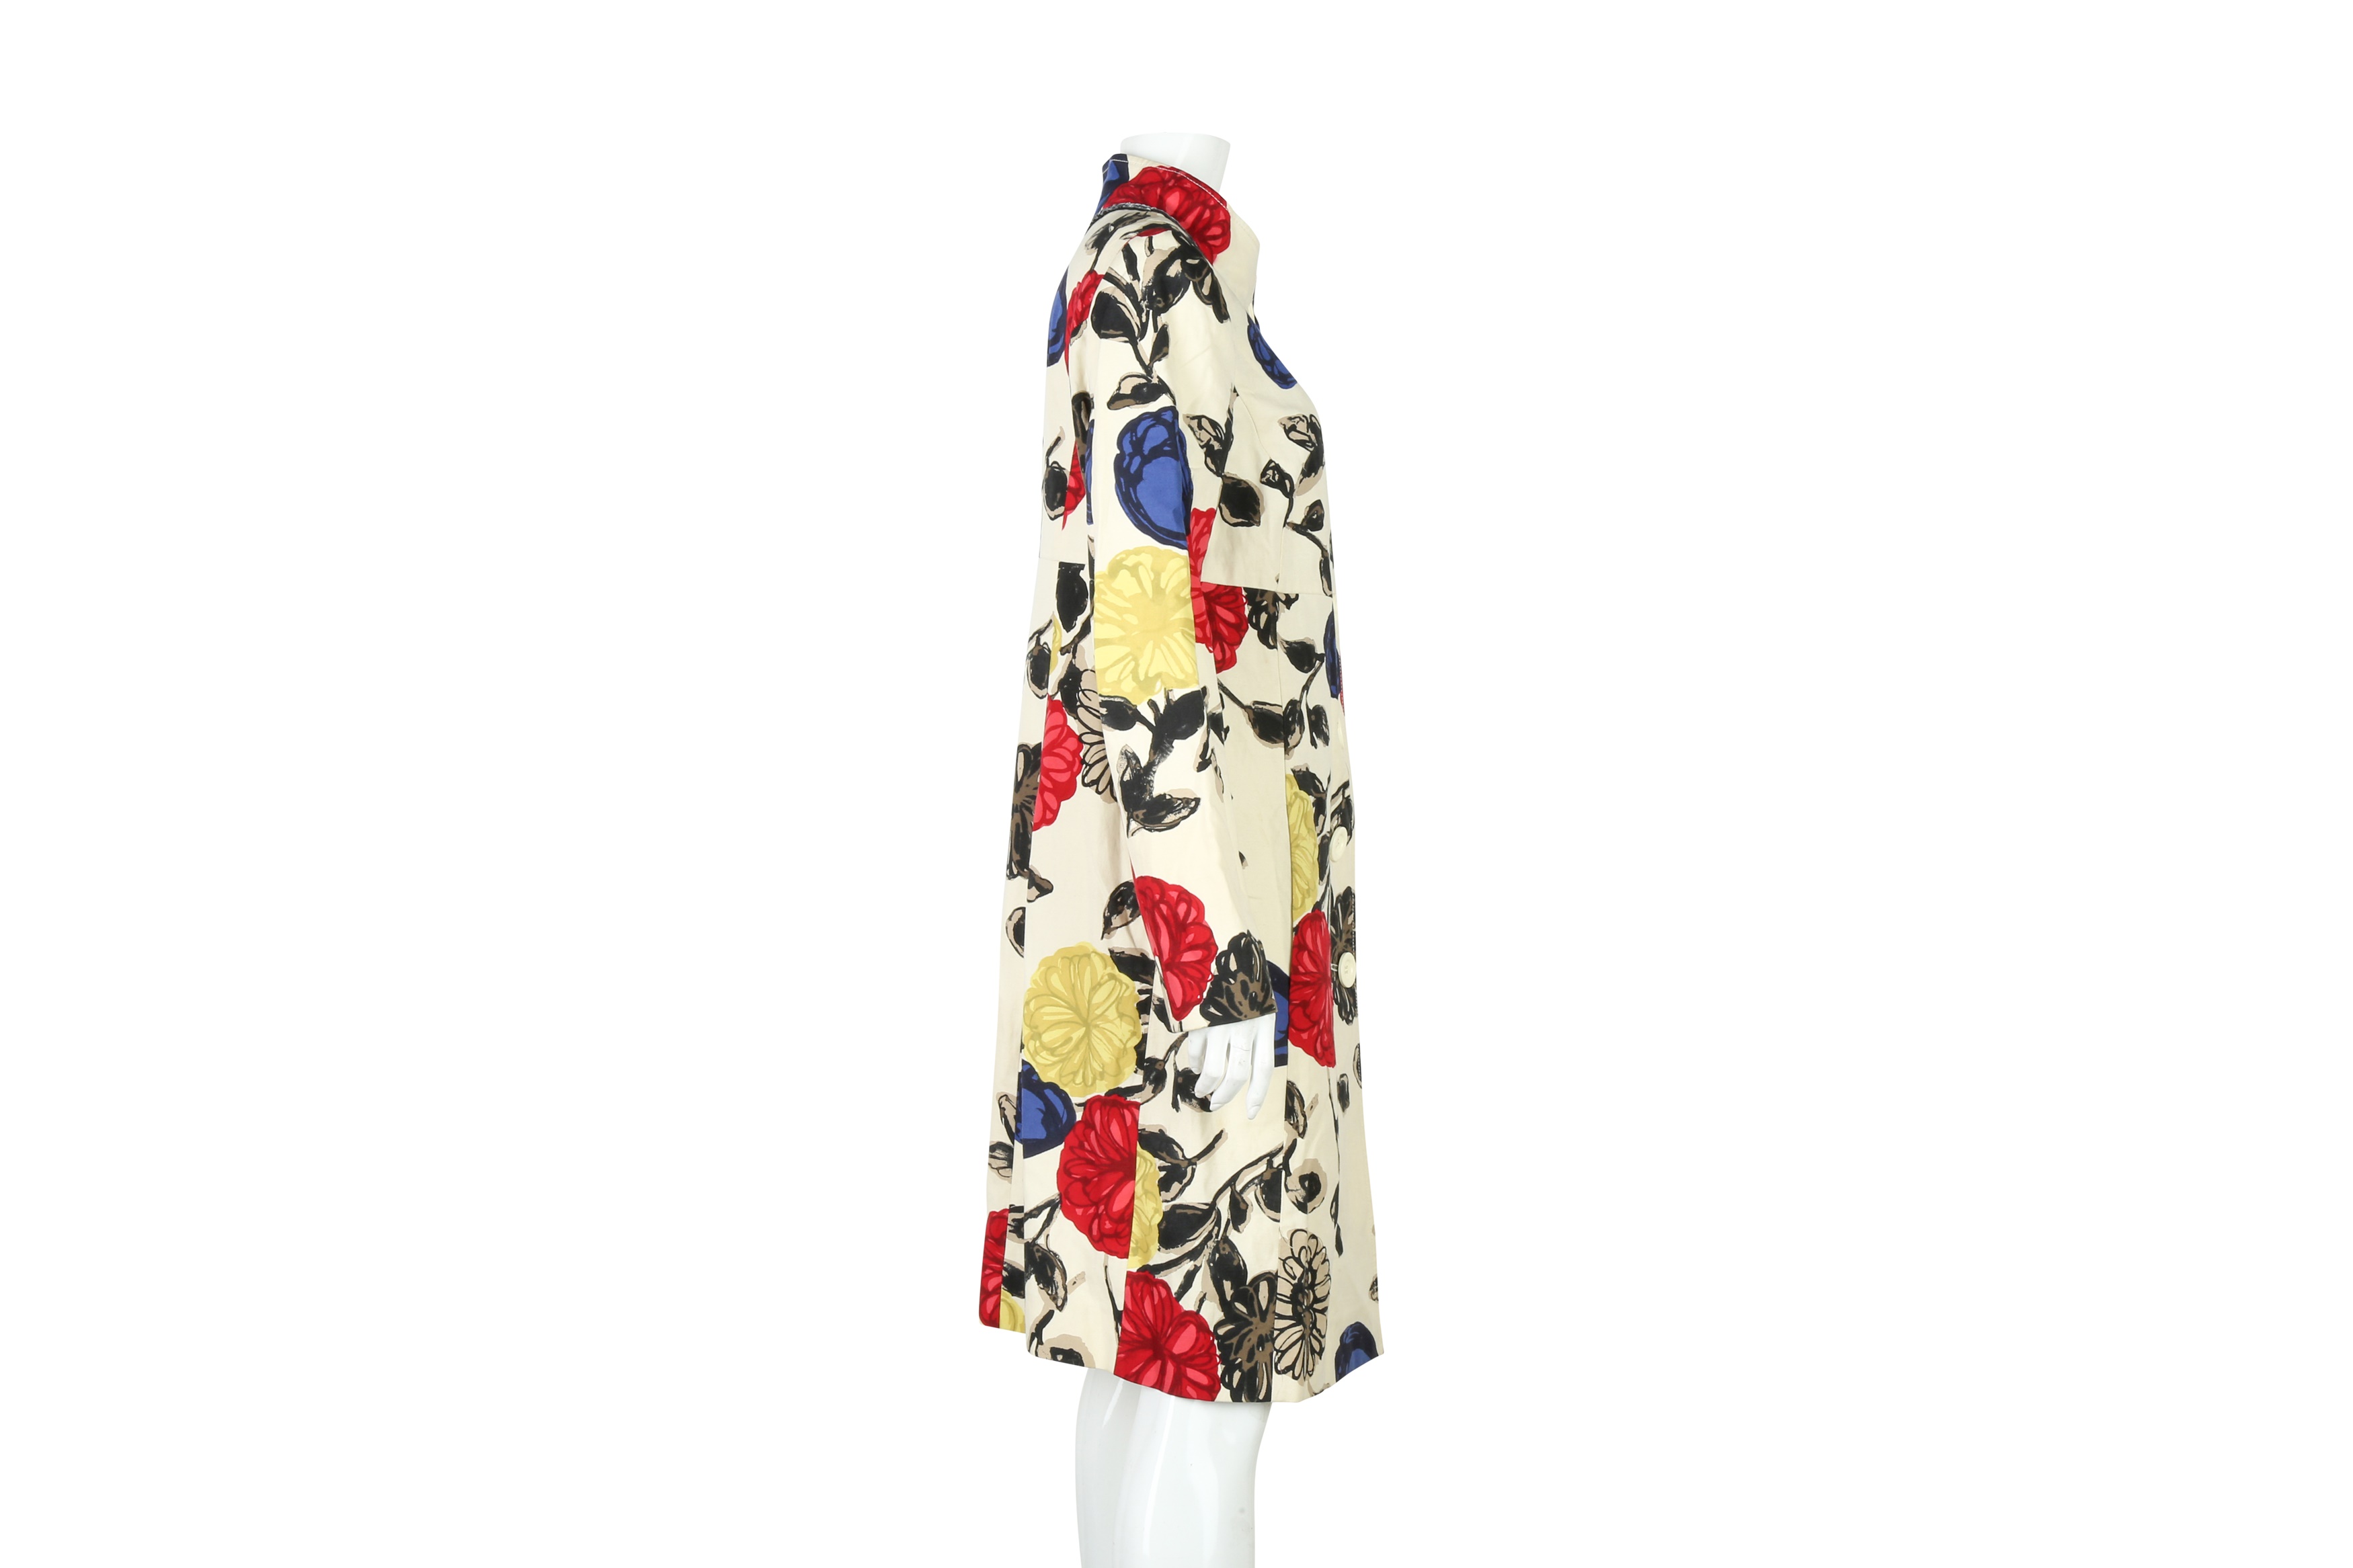 Moschino Cream Linen Floral Print Coat - Size 44 - Image 4 of 5